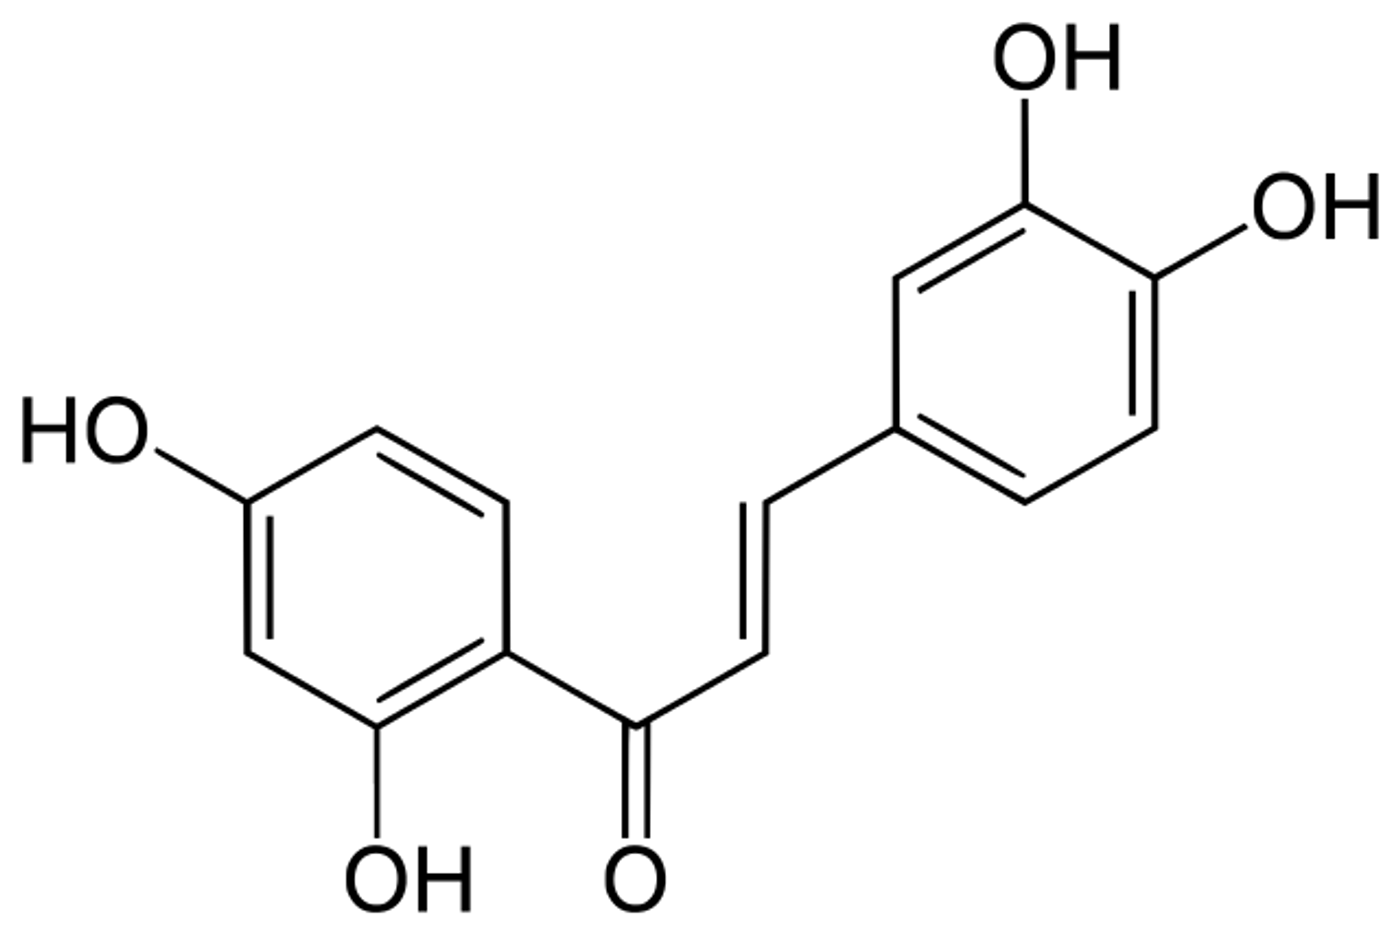 Chemical structure of butein.